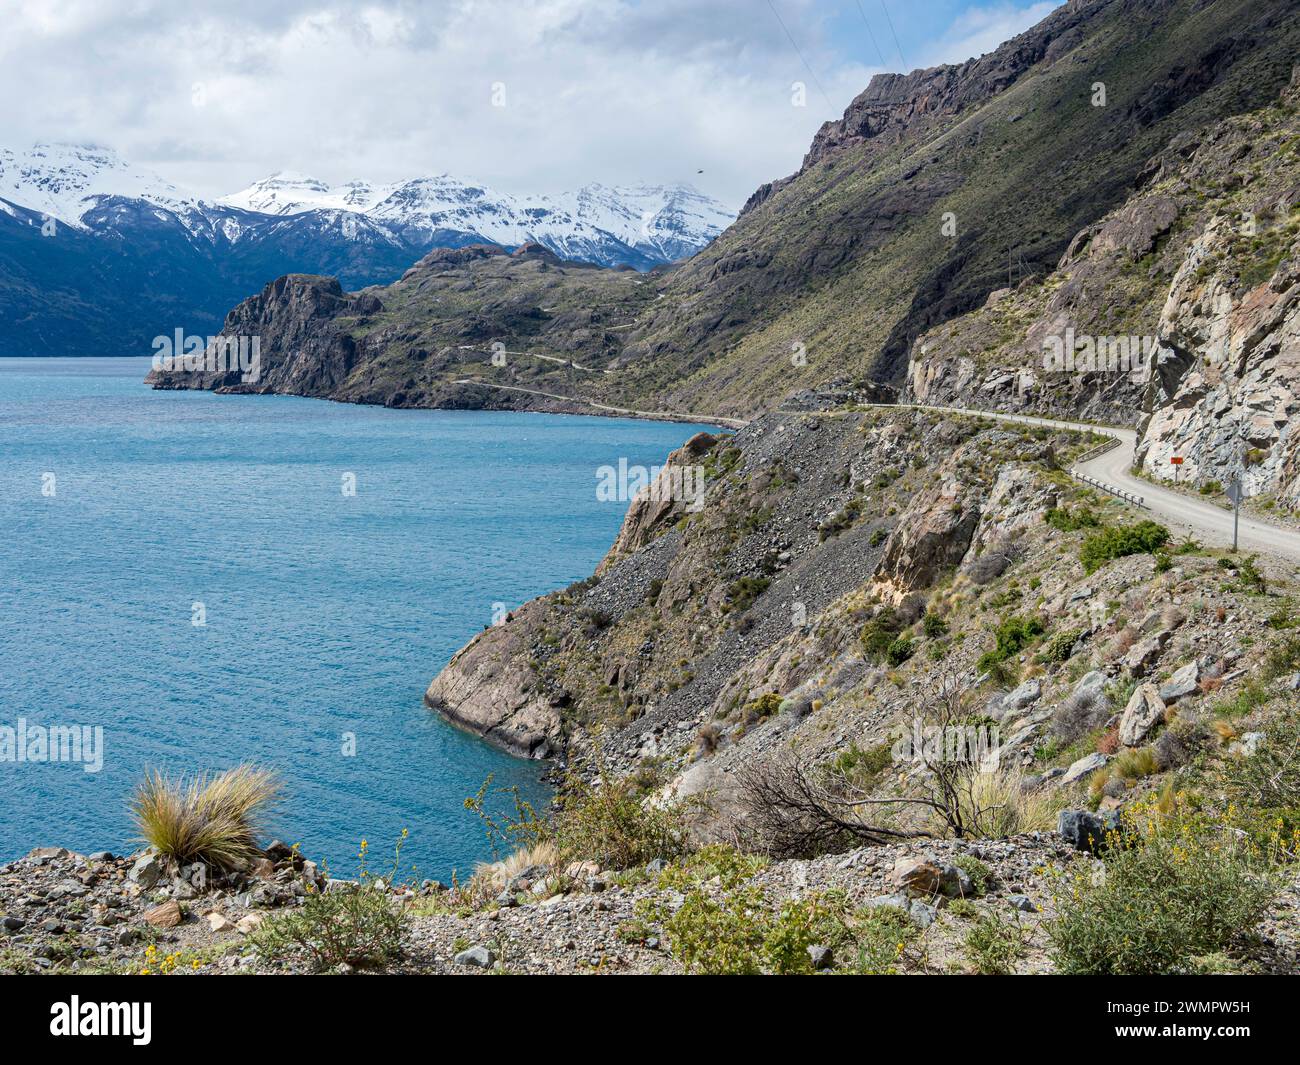 Road 265 along southern shore of lake Lago General Carrera, connecting the Carretera Austral with Chile Chico at the border to Argentina, Patagonia, C Stock Photo